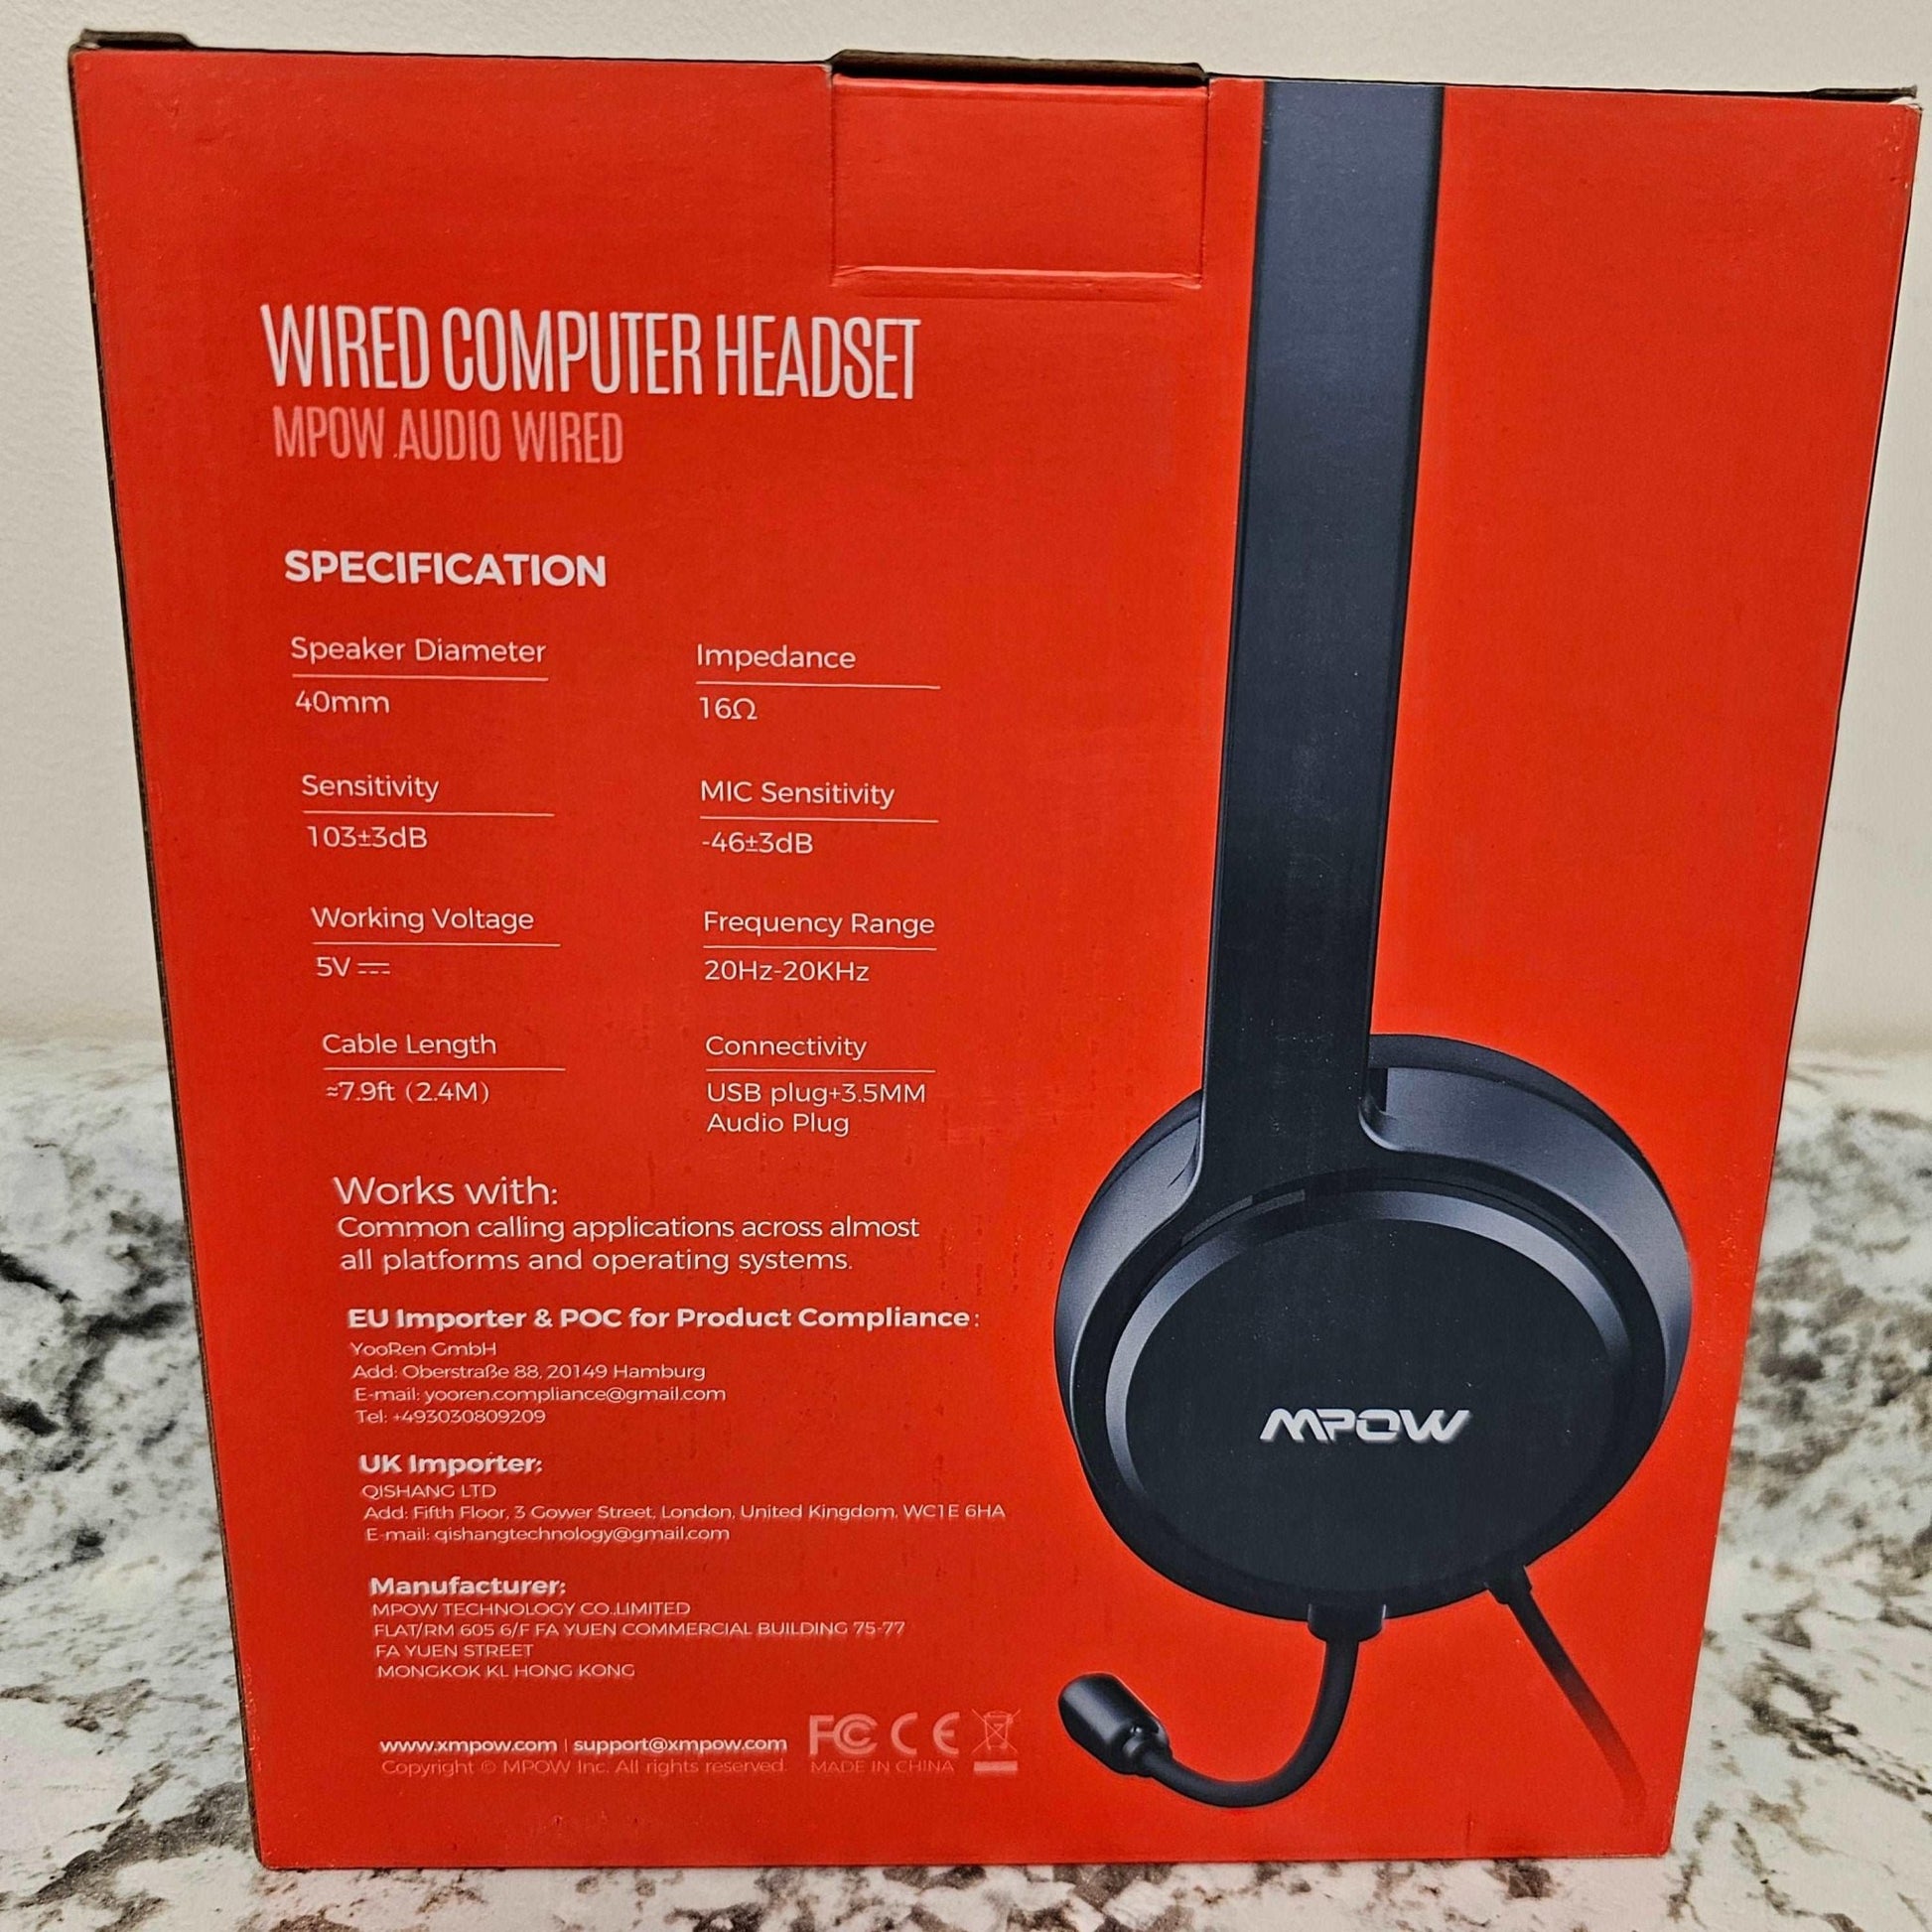 Wired Computer Headset - Enhanced Digital Audio, Noise Reduction, Versatile Connectivity - DQ Distribution